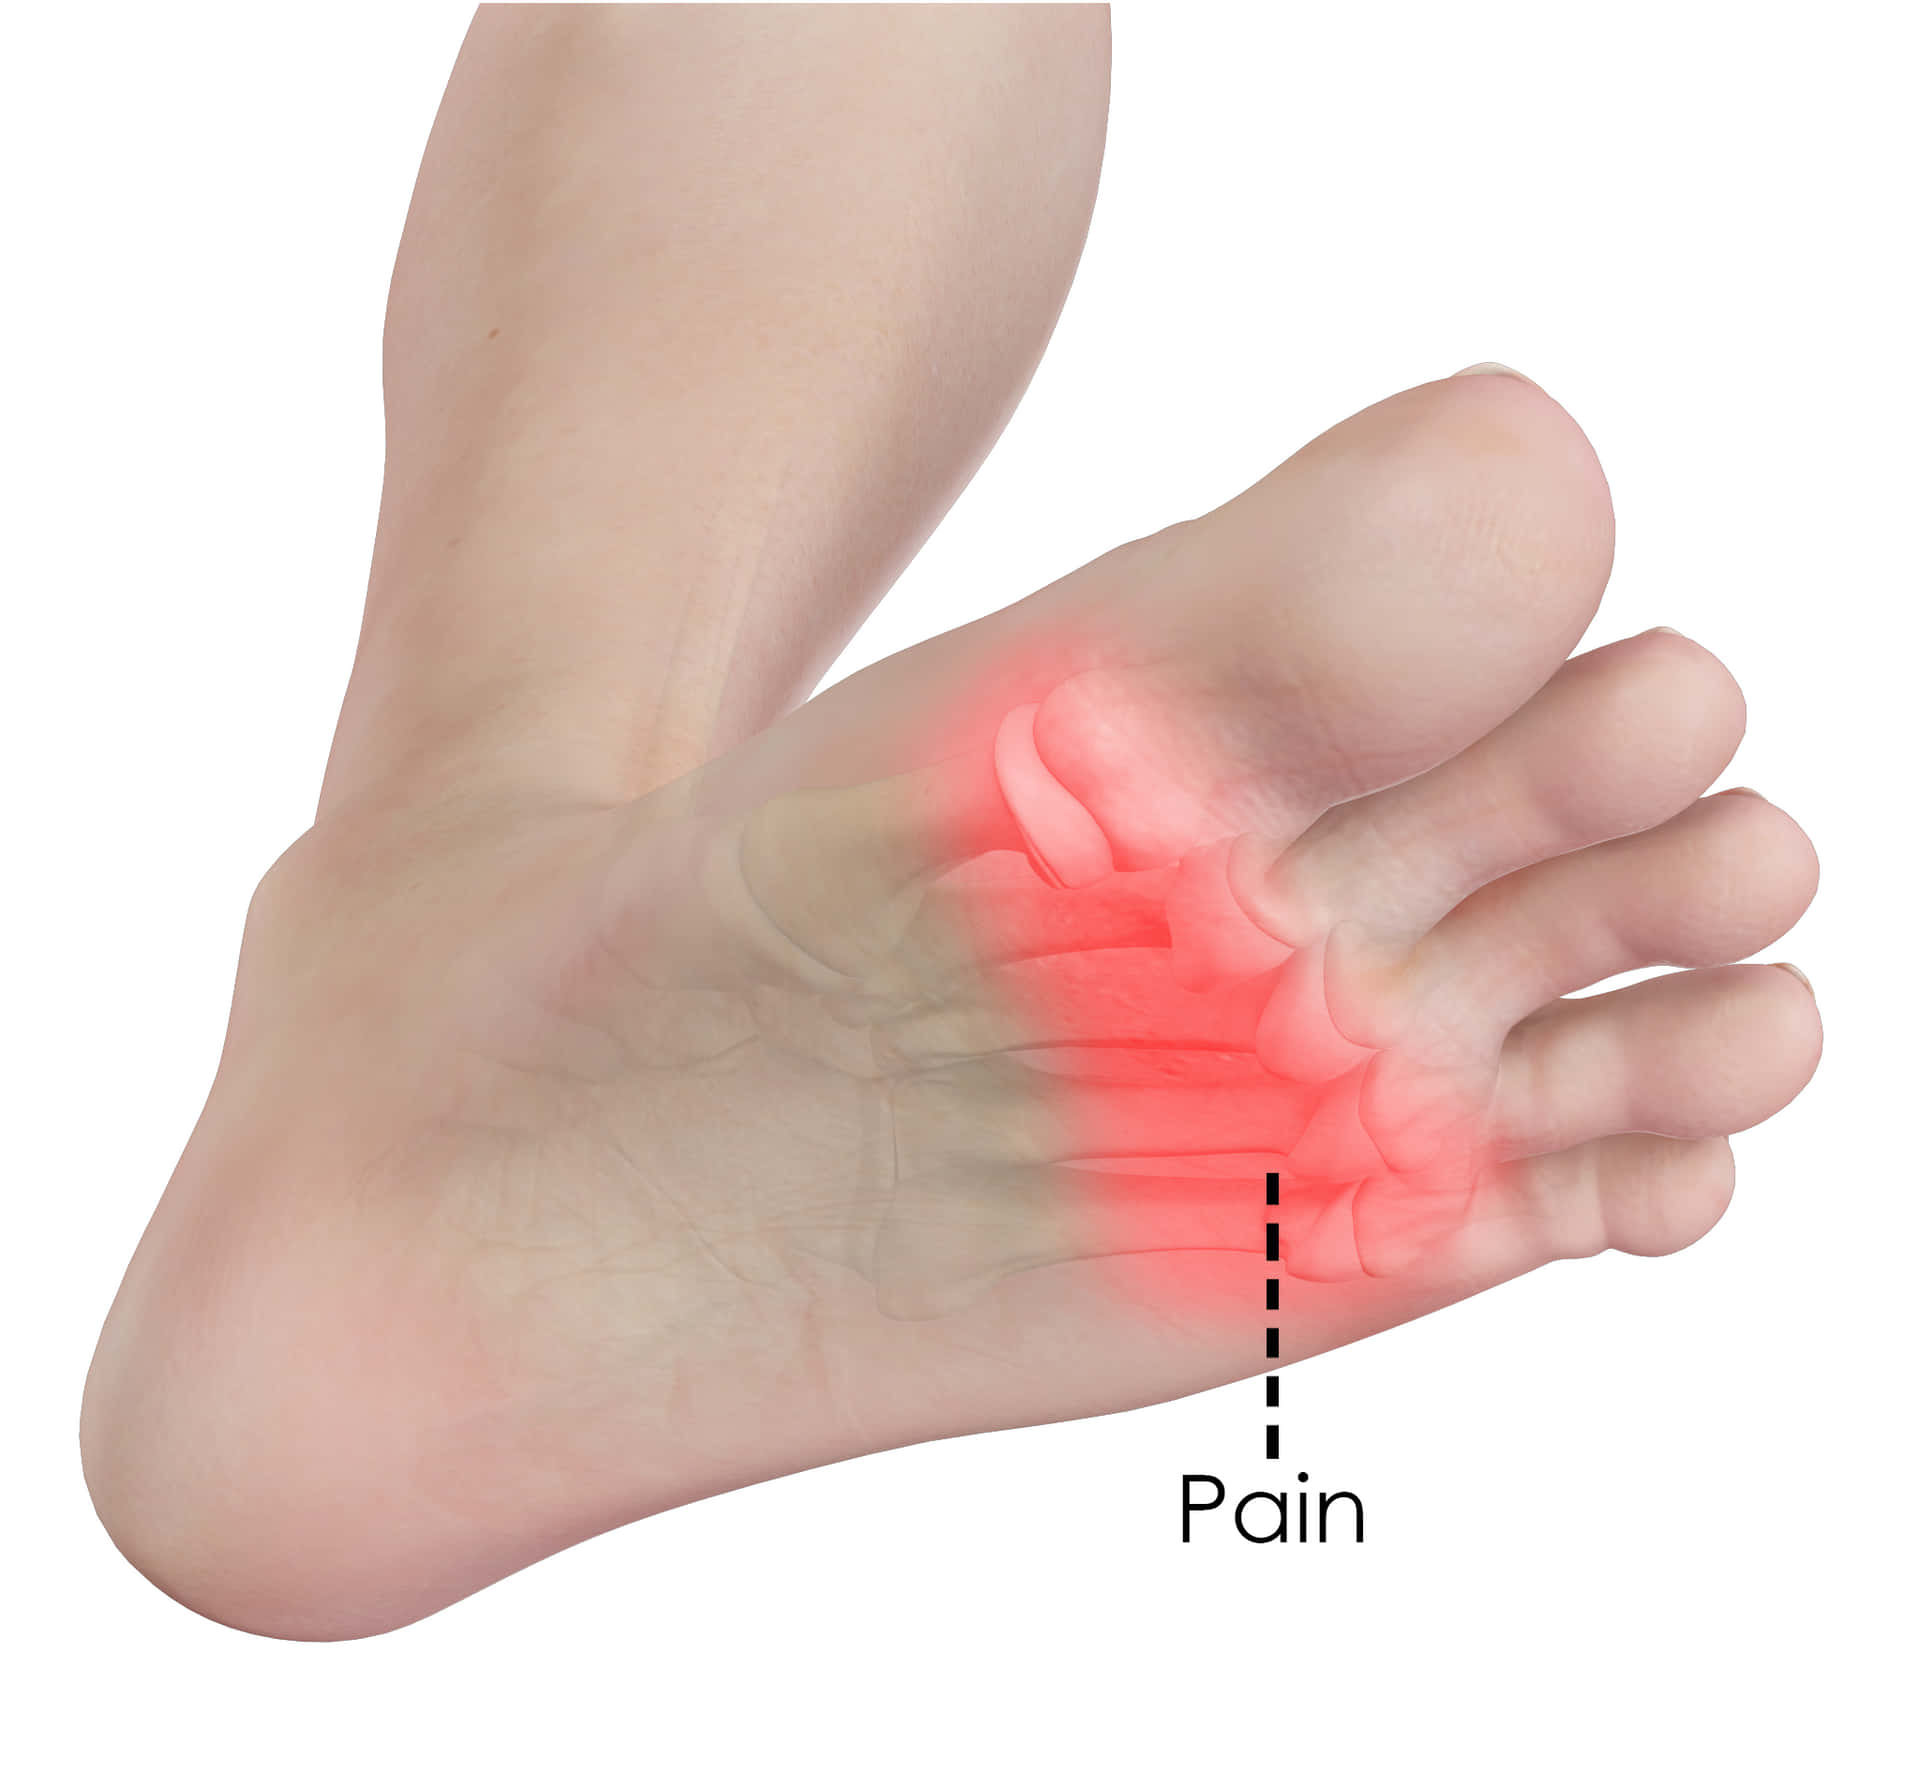 Digital Foot In Pain Picture